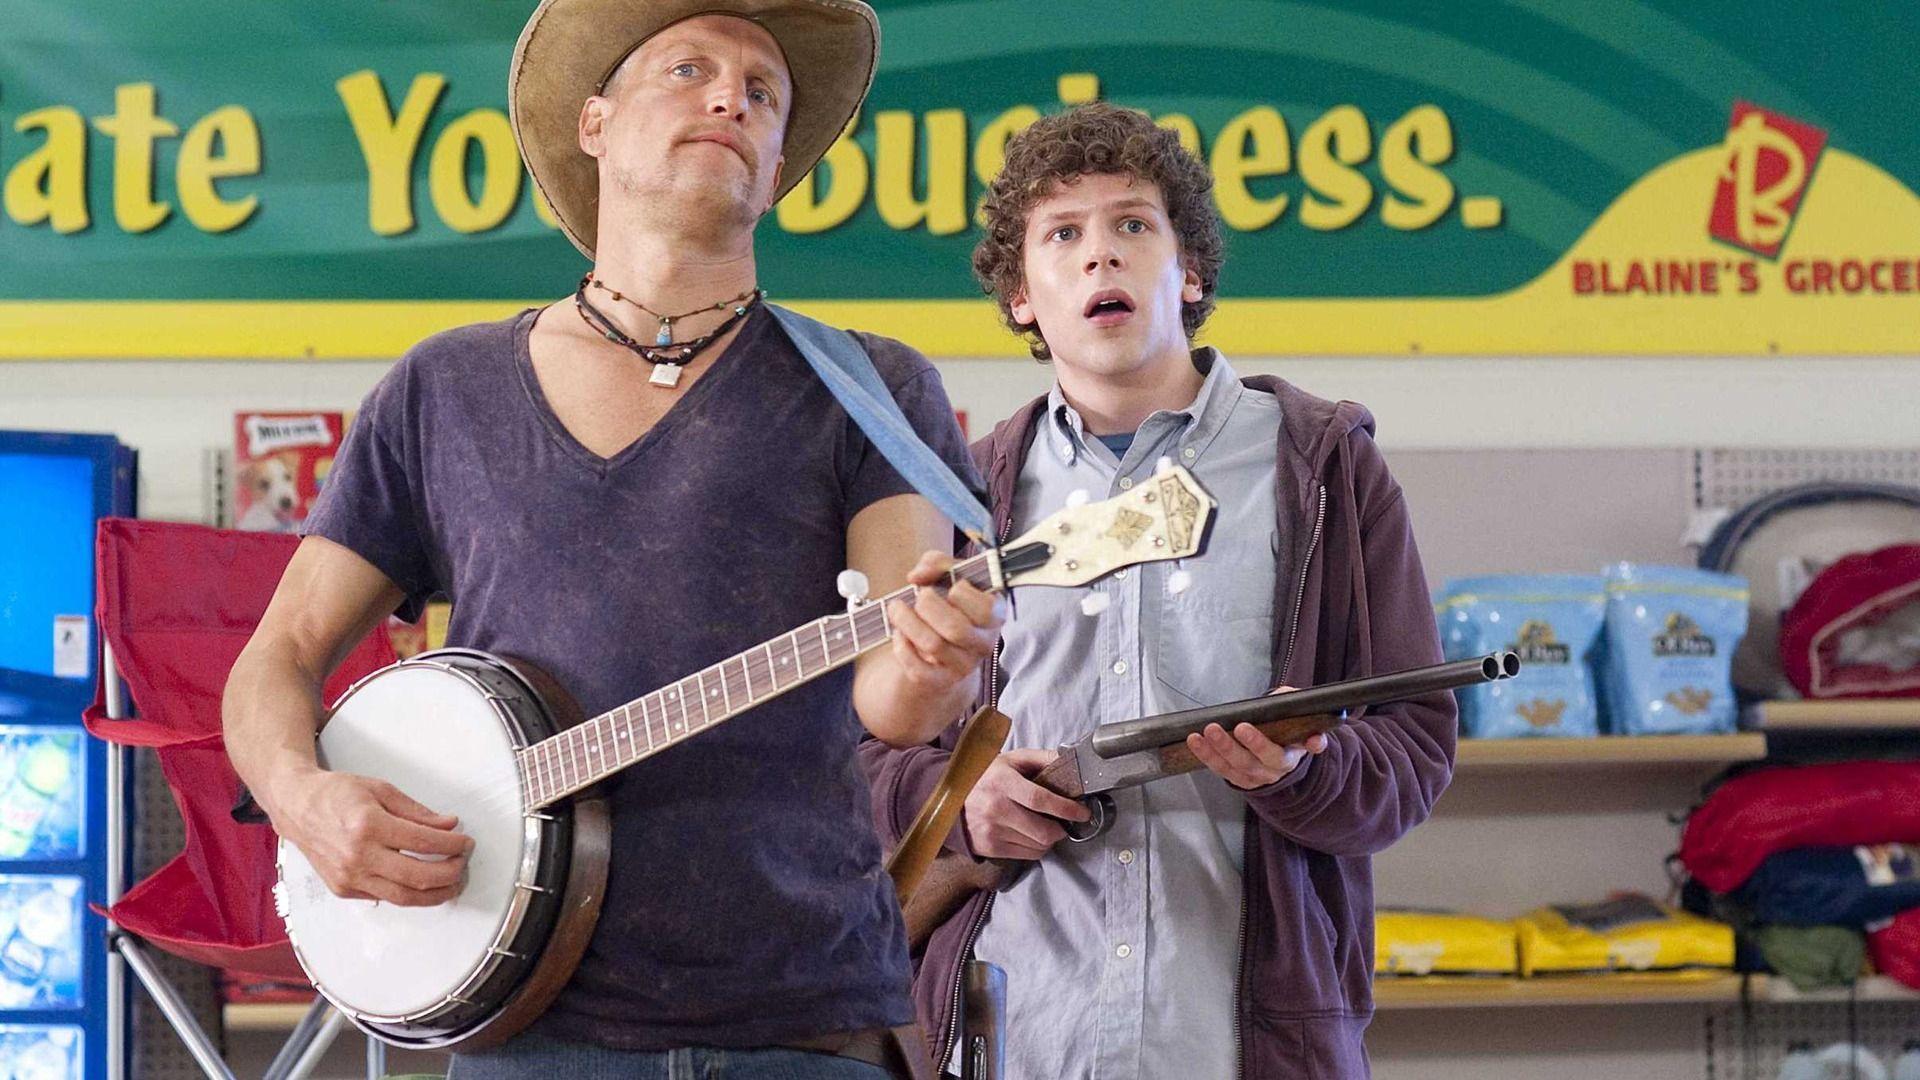 Zombieland Wallpapers